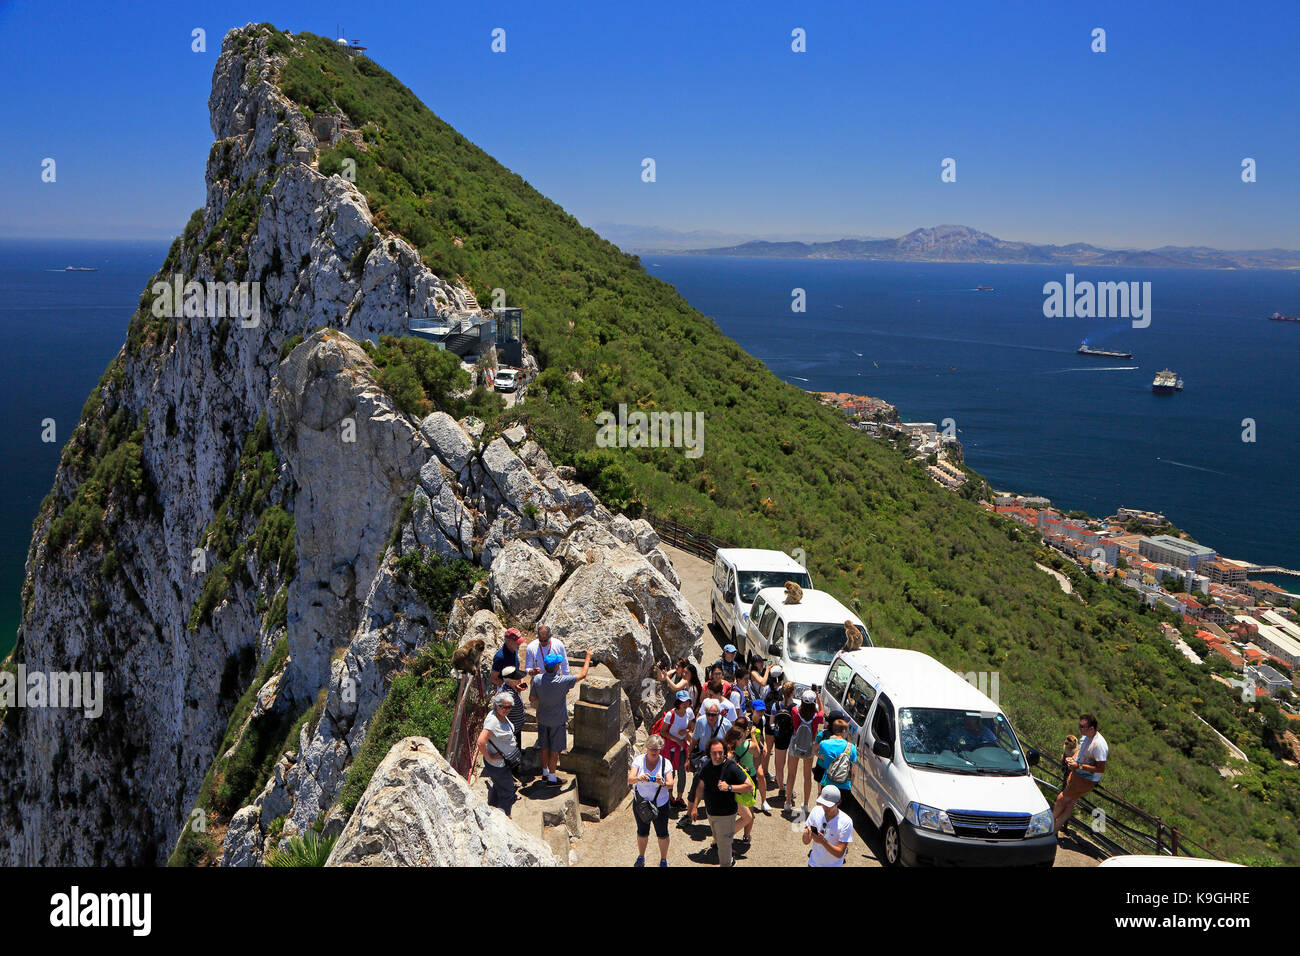 GIBRALTAR, GREAT BRITAIN - JULY 01, 2017: Tourists arriving with buses and enjoying the landscape of Gibraltar the British Overseas Territory. Stock Photo